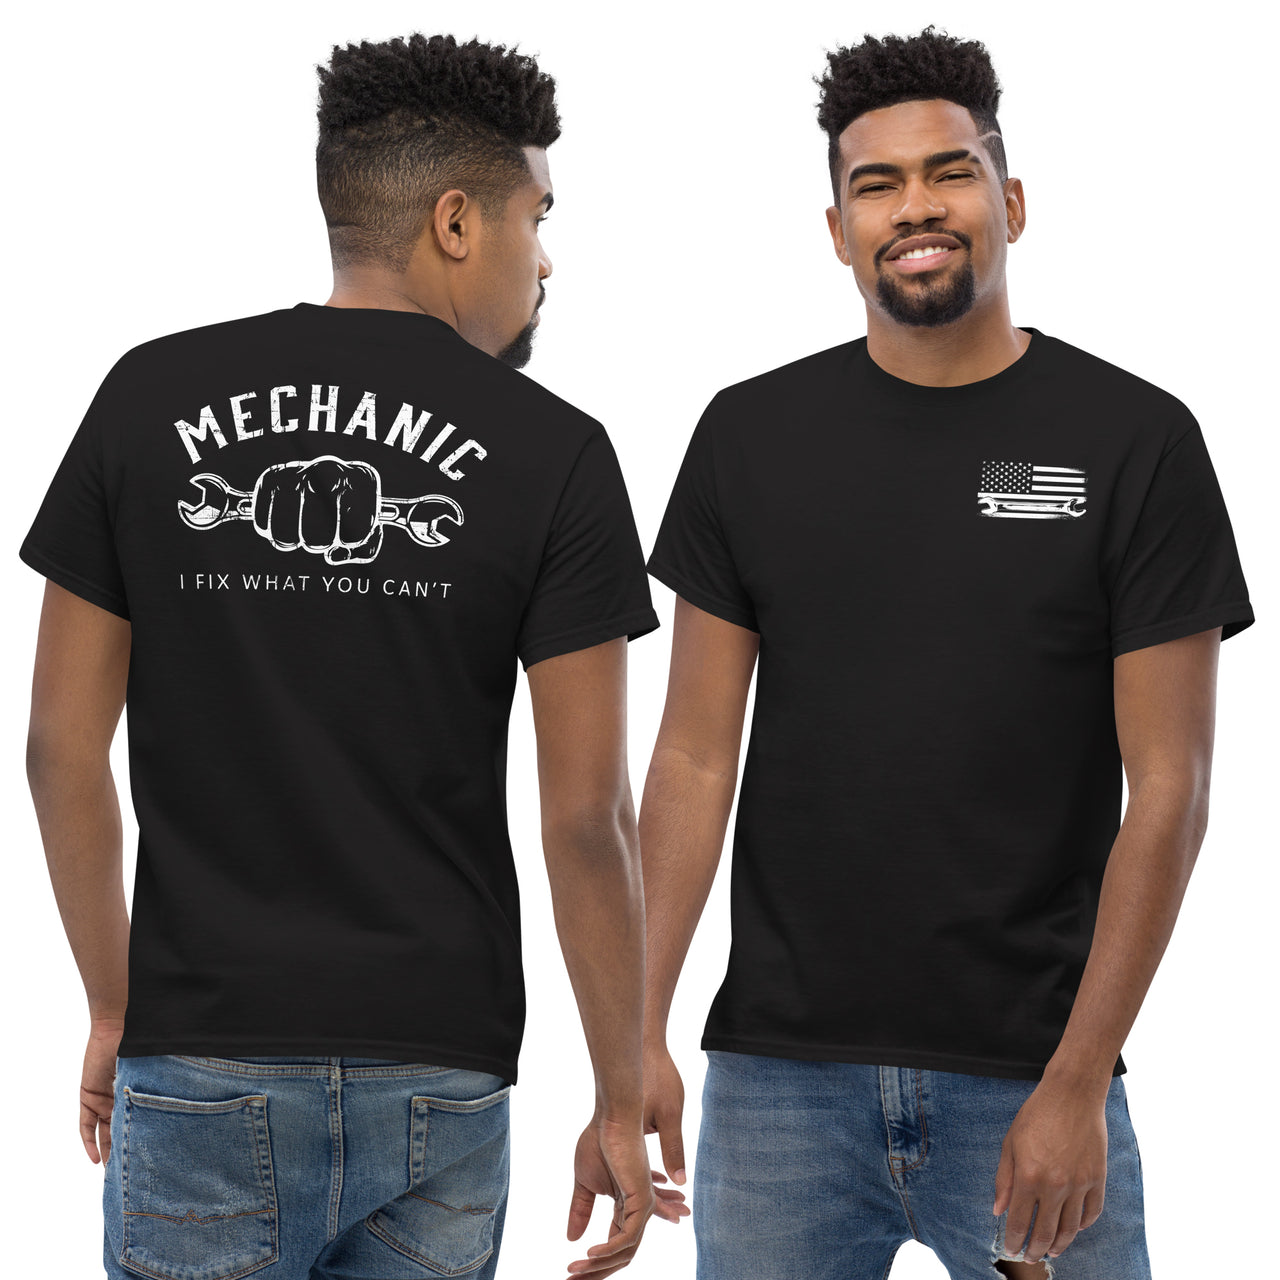 Mechanic T-Shirt - I Fix What You Cant modeled in black